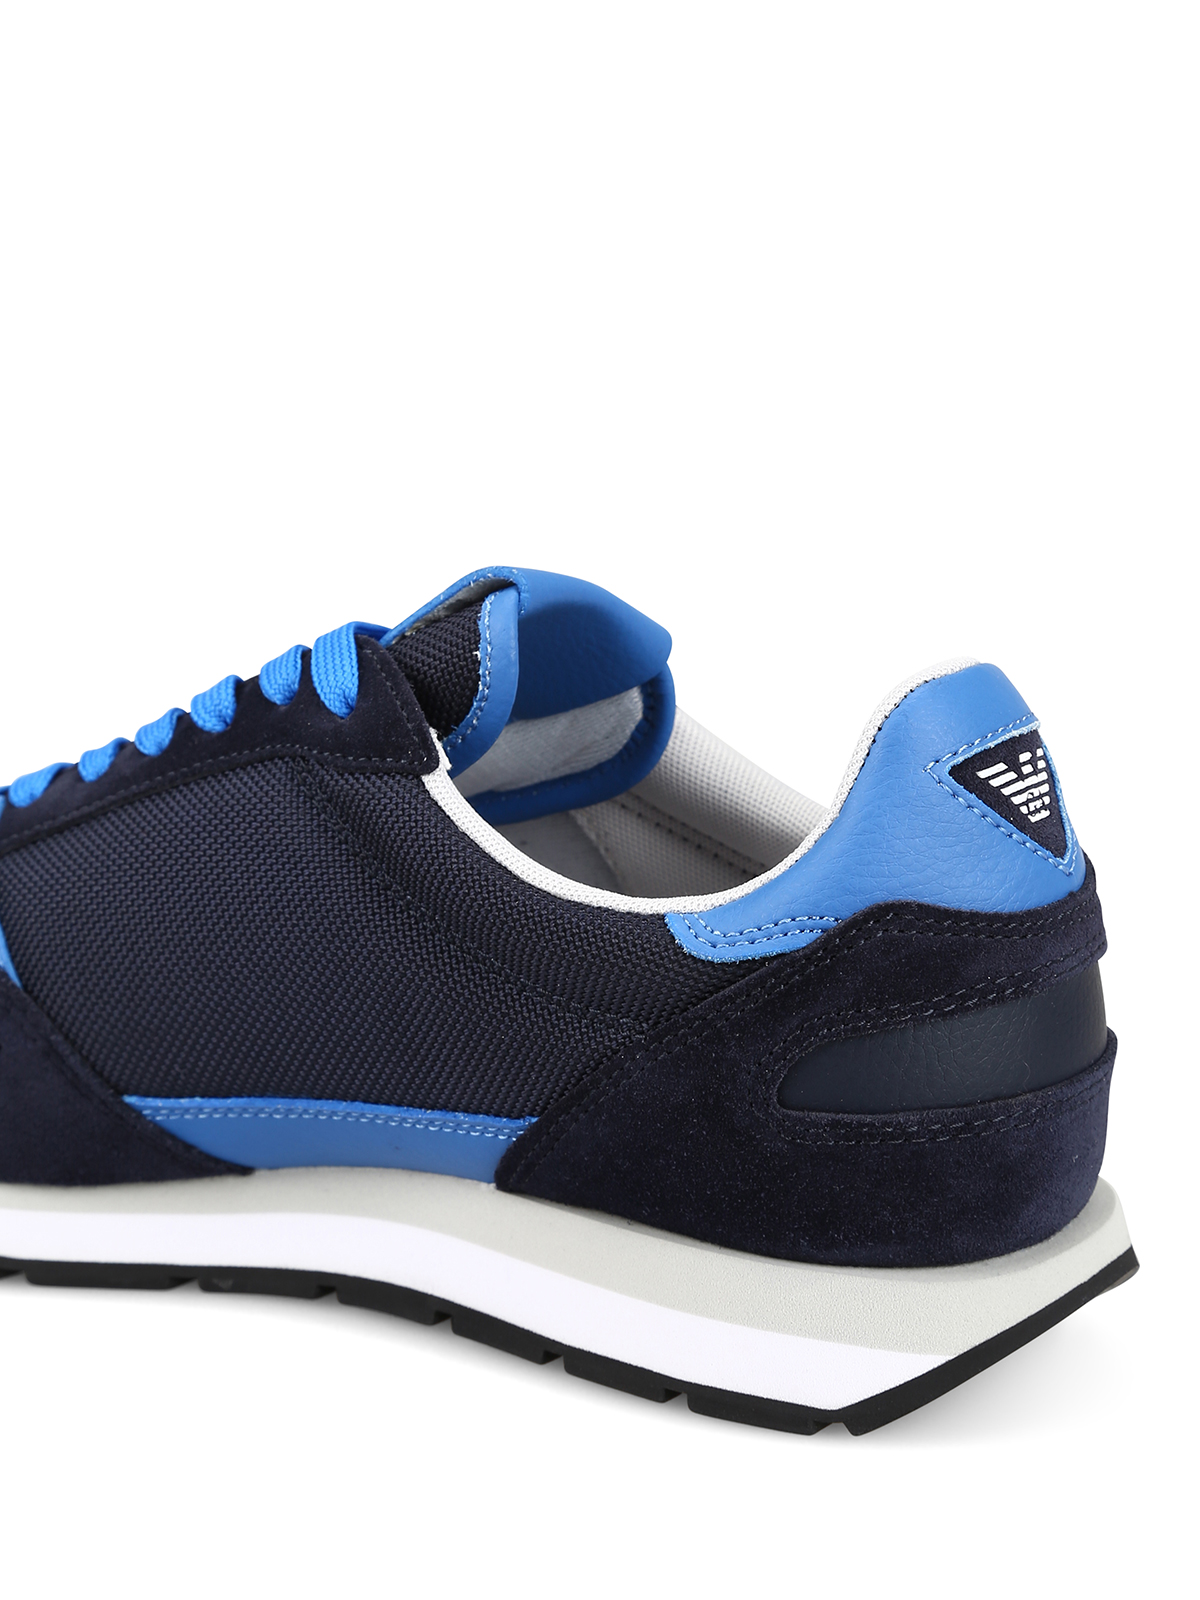 Emporio Armani Rubber Trainers in Dark Blue Blue Womens Shoes Trainers Low-top trainers 